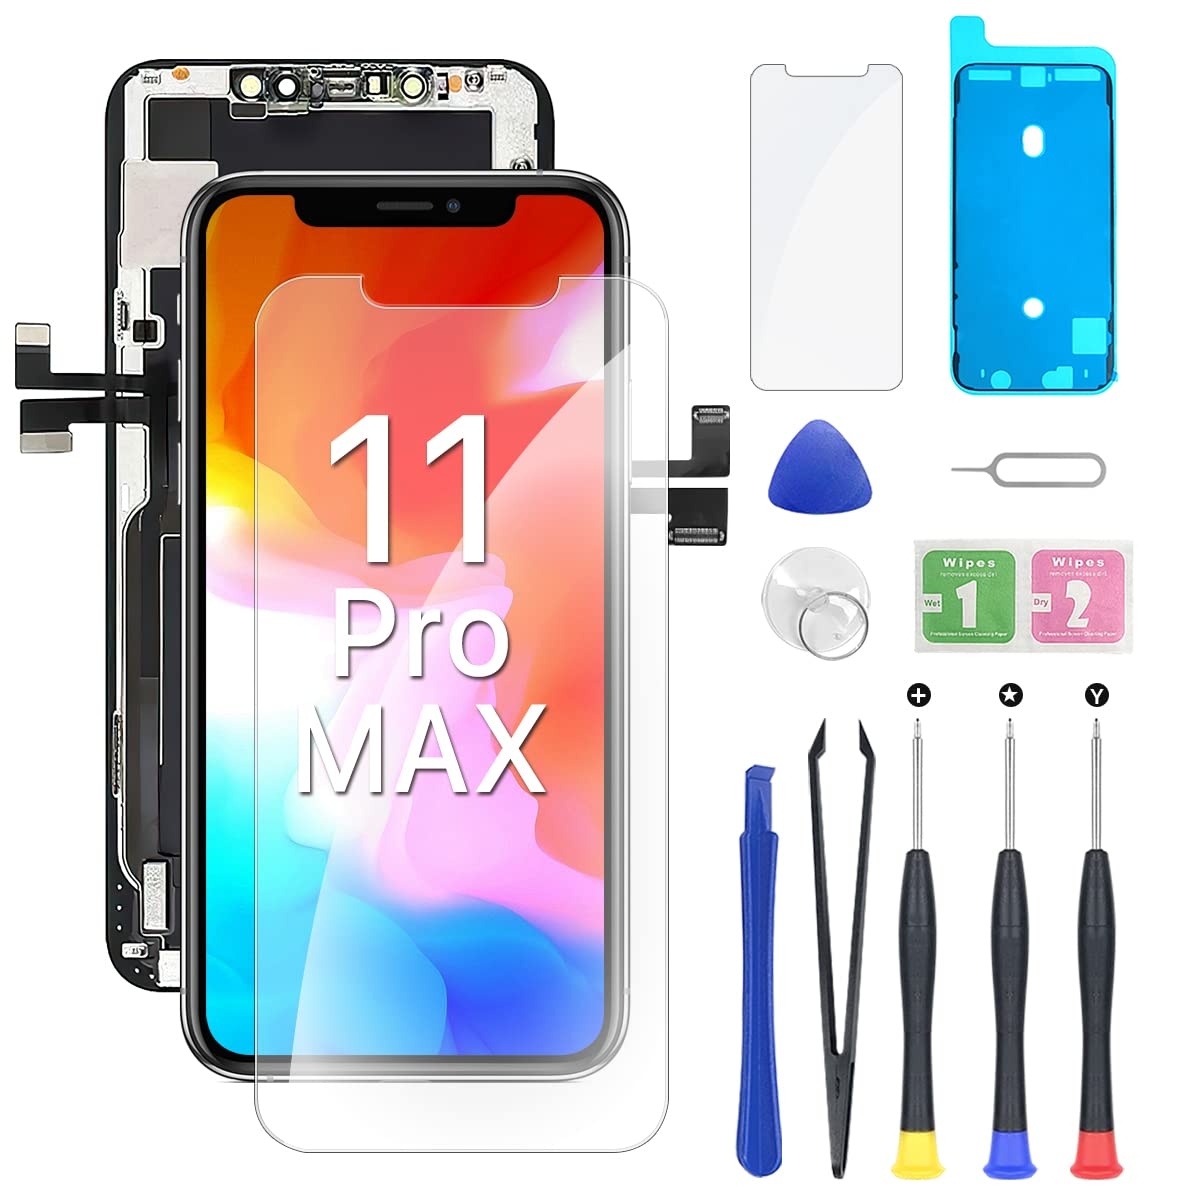 EXW for iPhone 11 Pro Max Display LCD Screen Replacement 6.5 Inch iPhone 11 Pro Max Display Screen & Touch Digitizer Frame Assembly Kit with Complete Repair Tools and Screen Protector